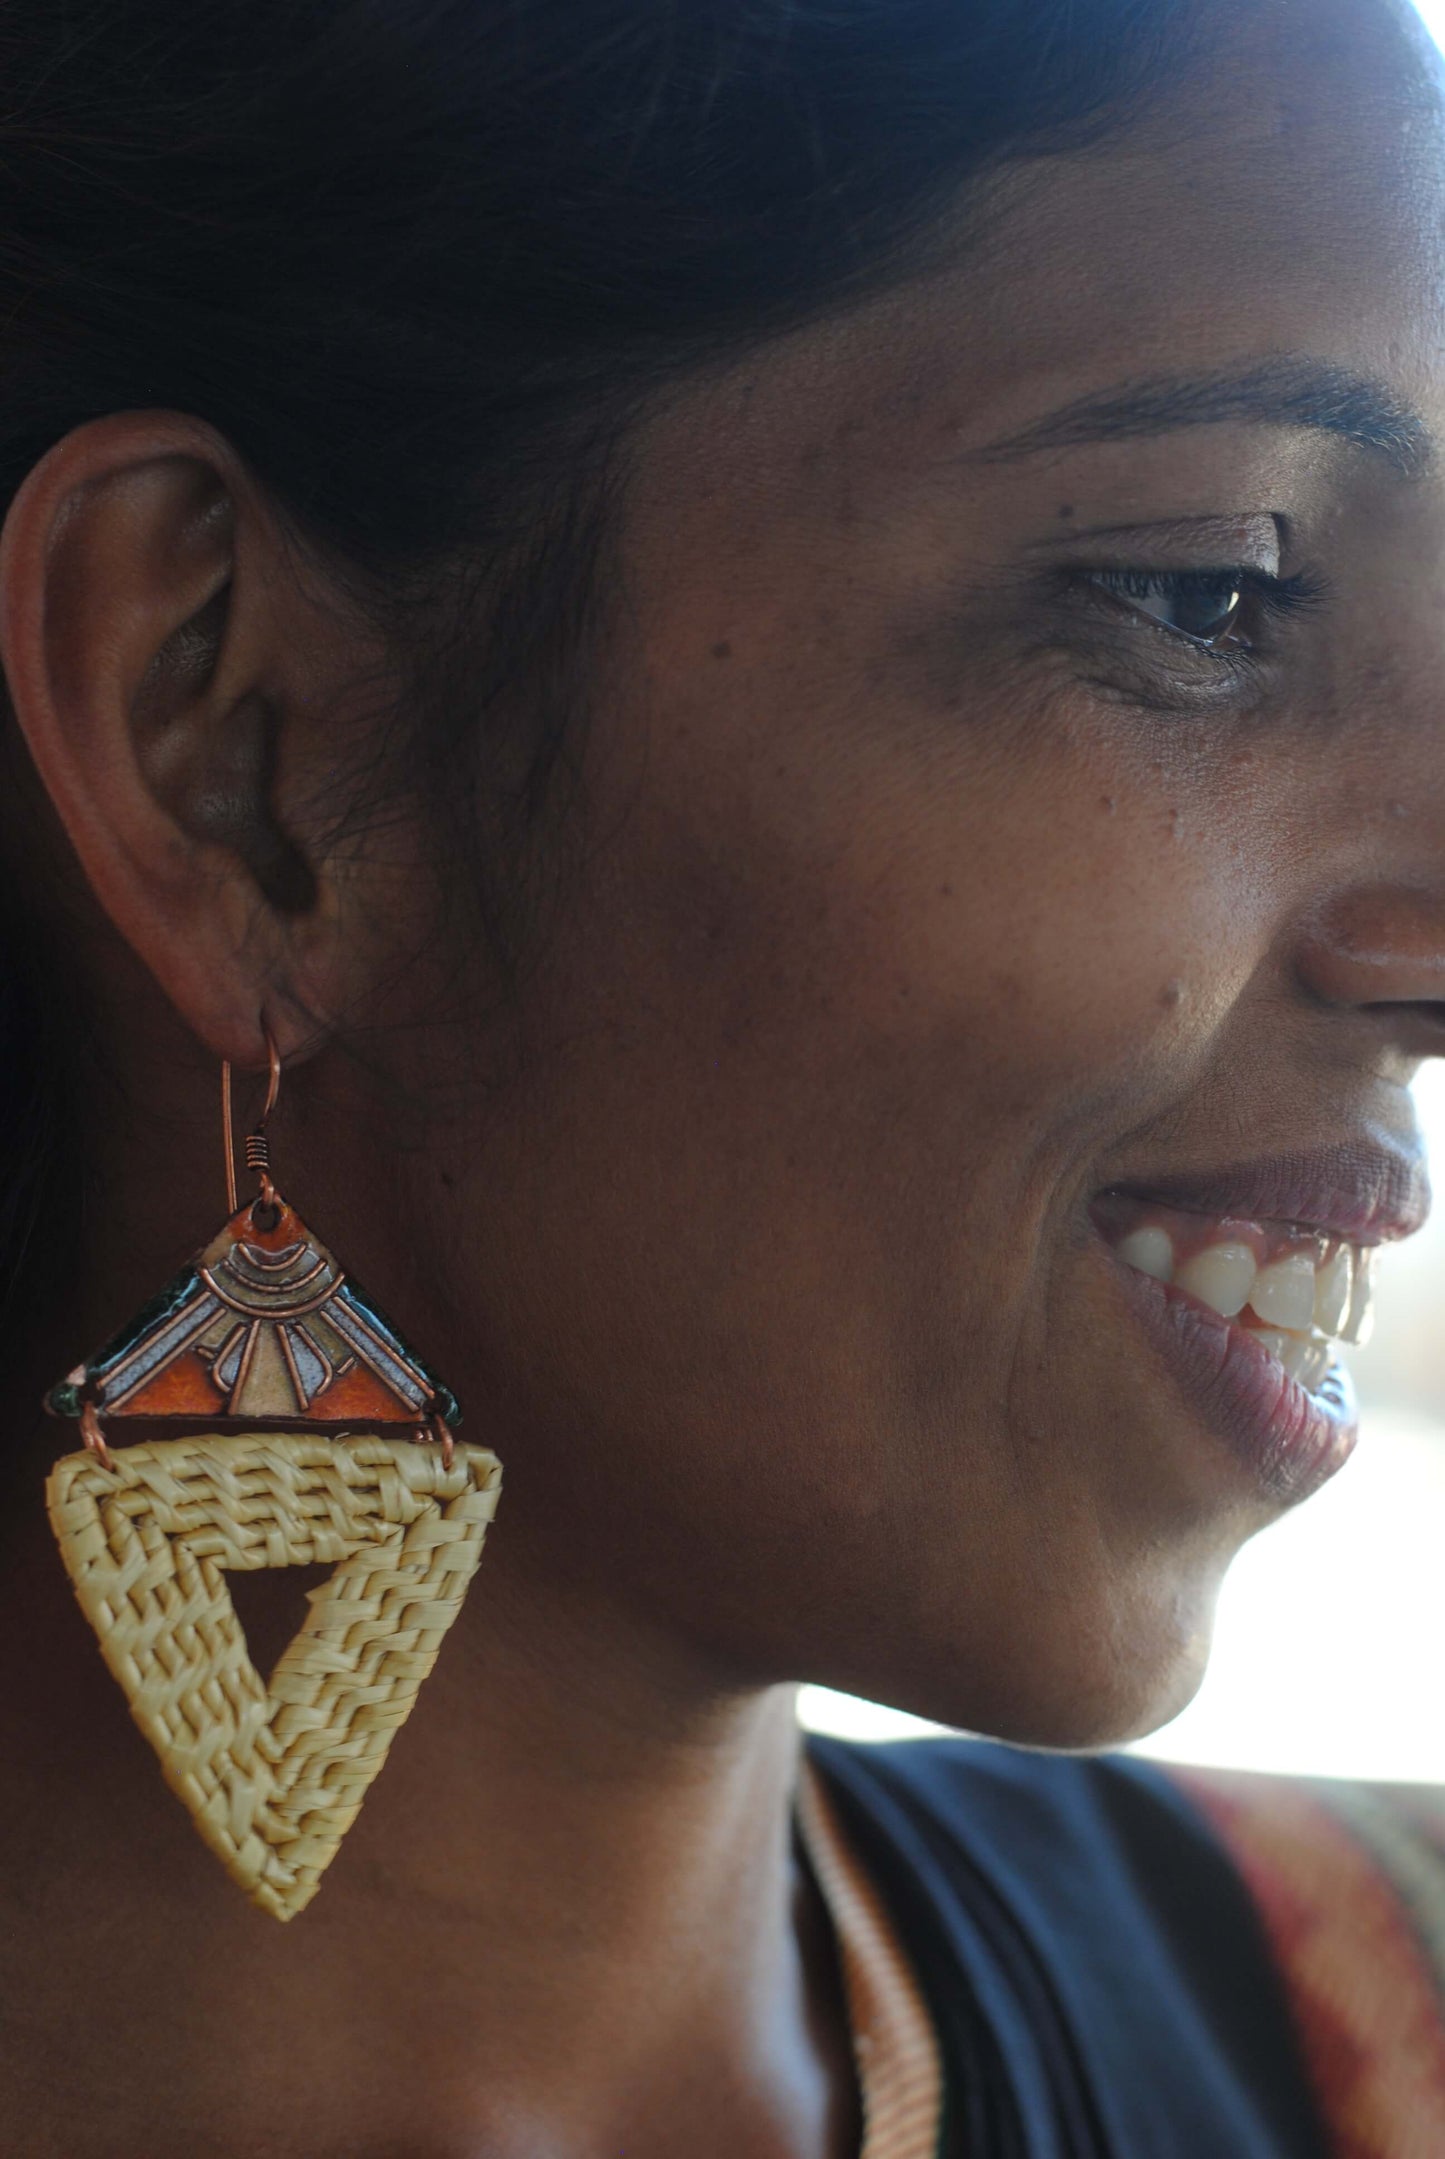 Truna natural fibre golden grass and copper enamel handcrafted jewelry from Odisha, Trikon earrings